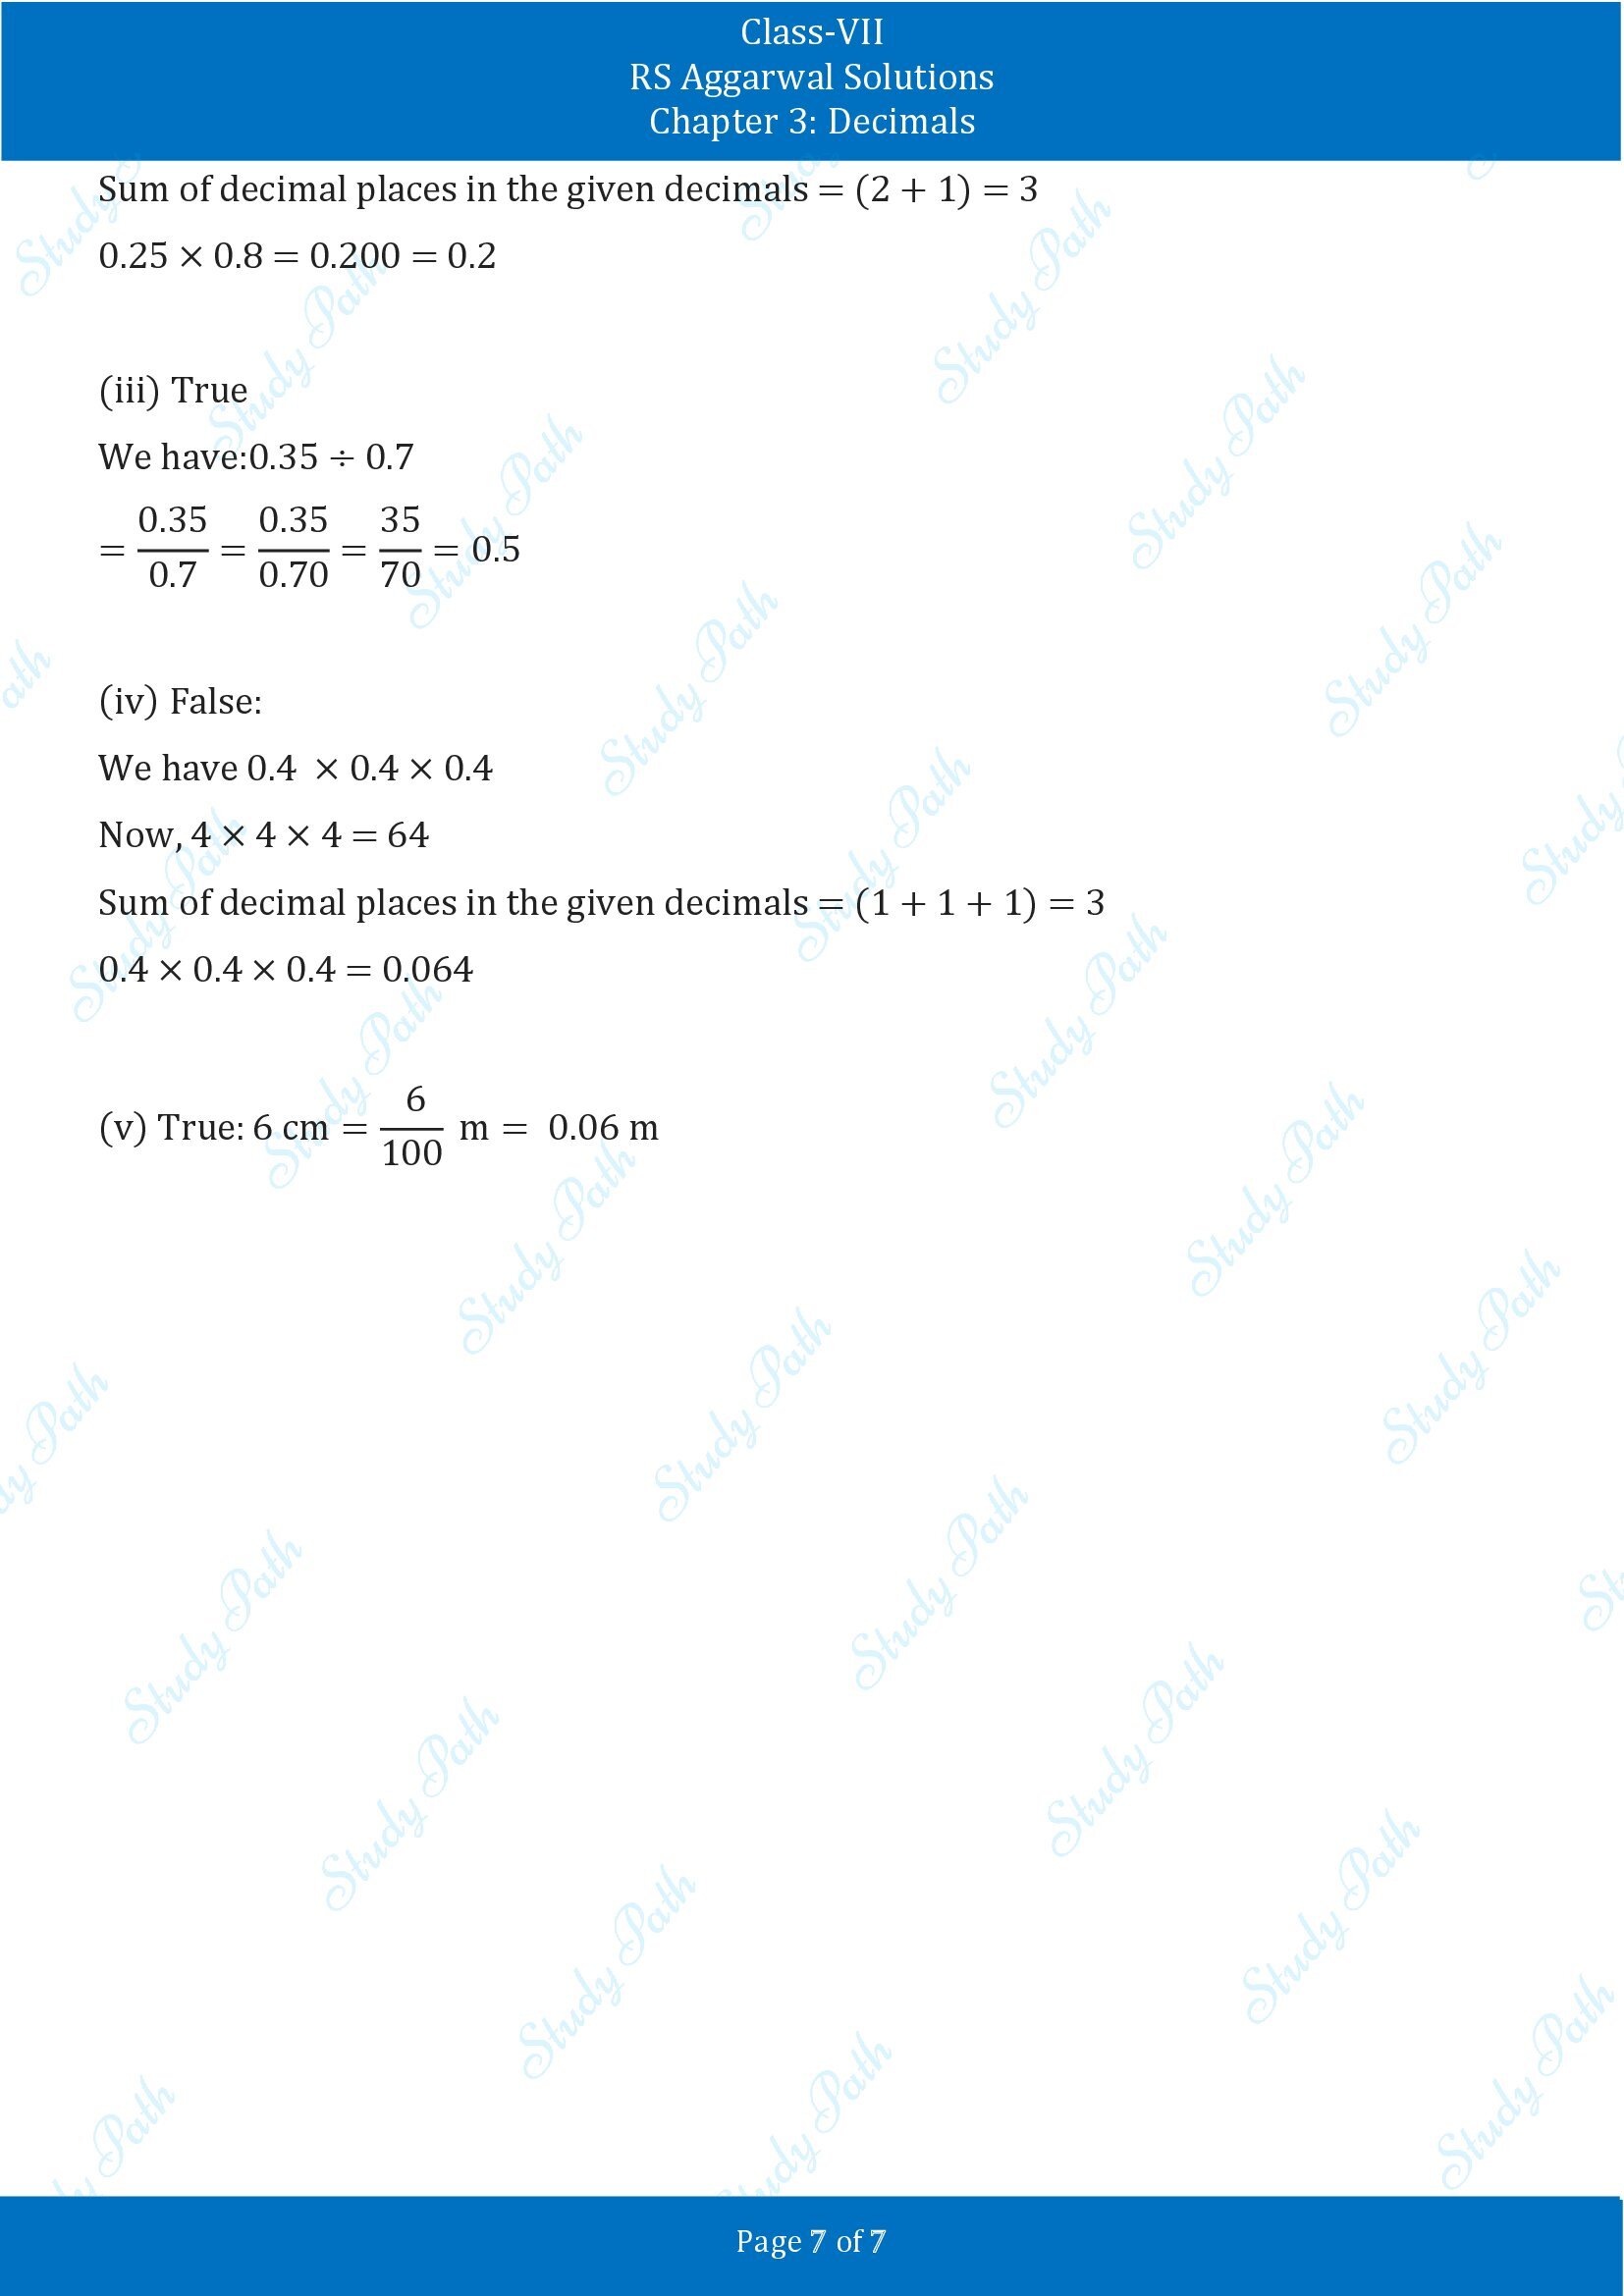 RS Aggarwal Solutions Class 7 Chapter 3 Decimals Test Paper 00007